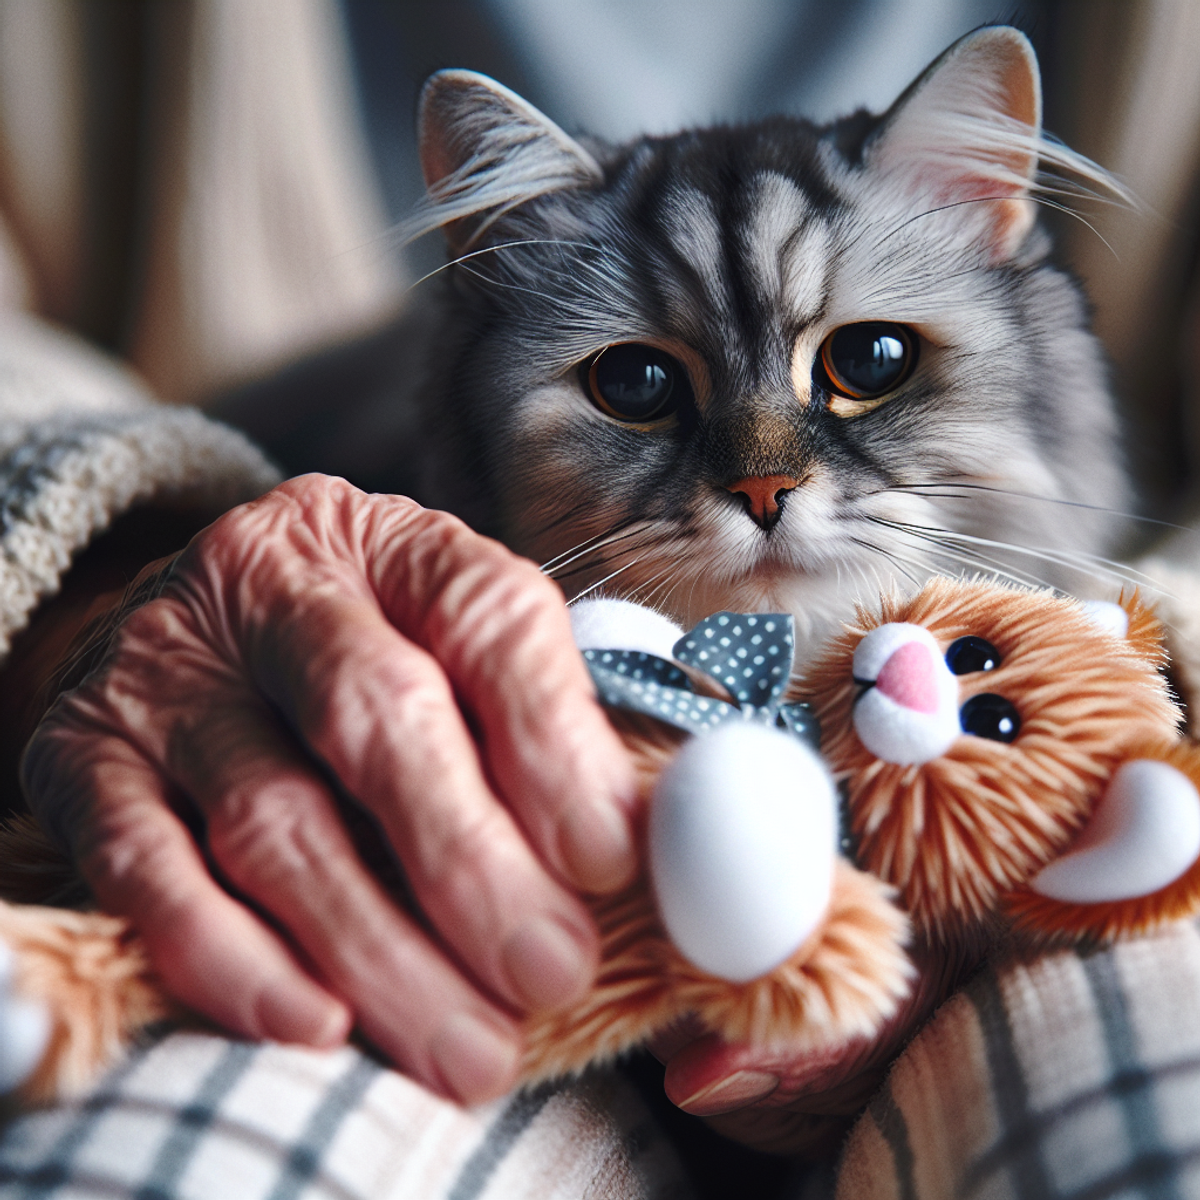 Senior cat playing with a plush toy.